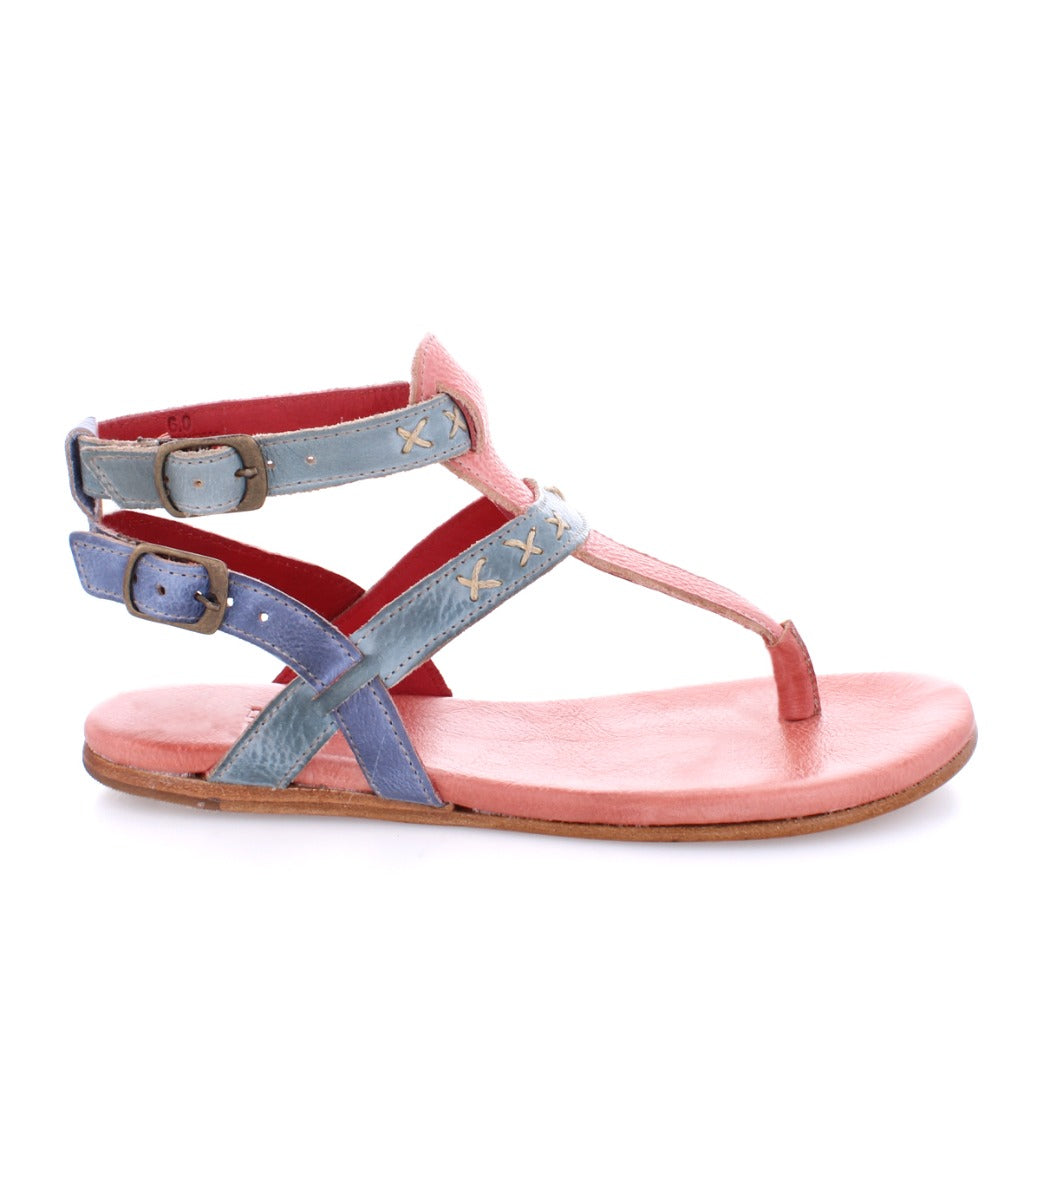 A pair of Moon sandals by Bed Stu with blue and pink straps.